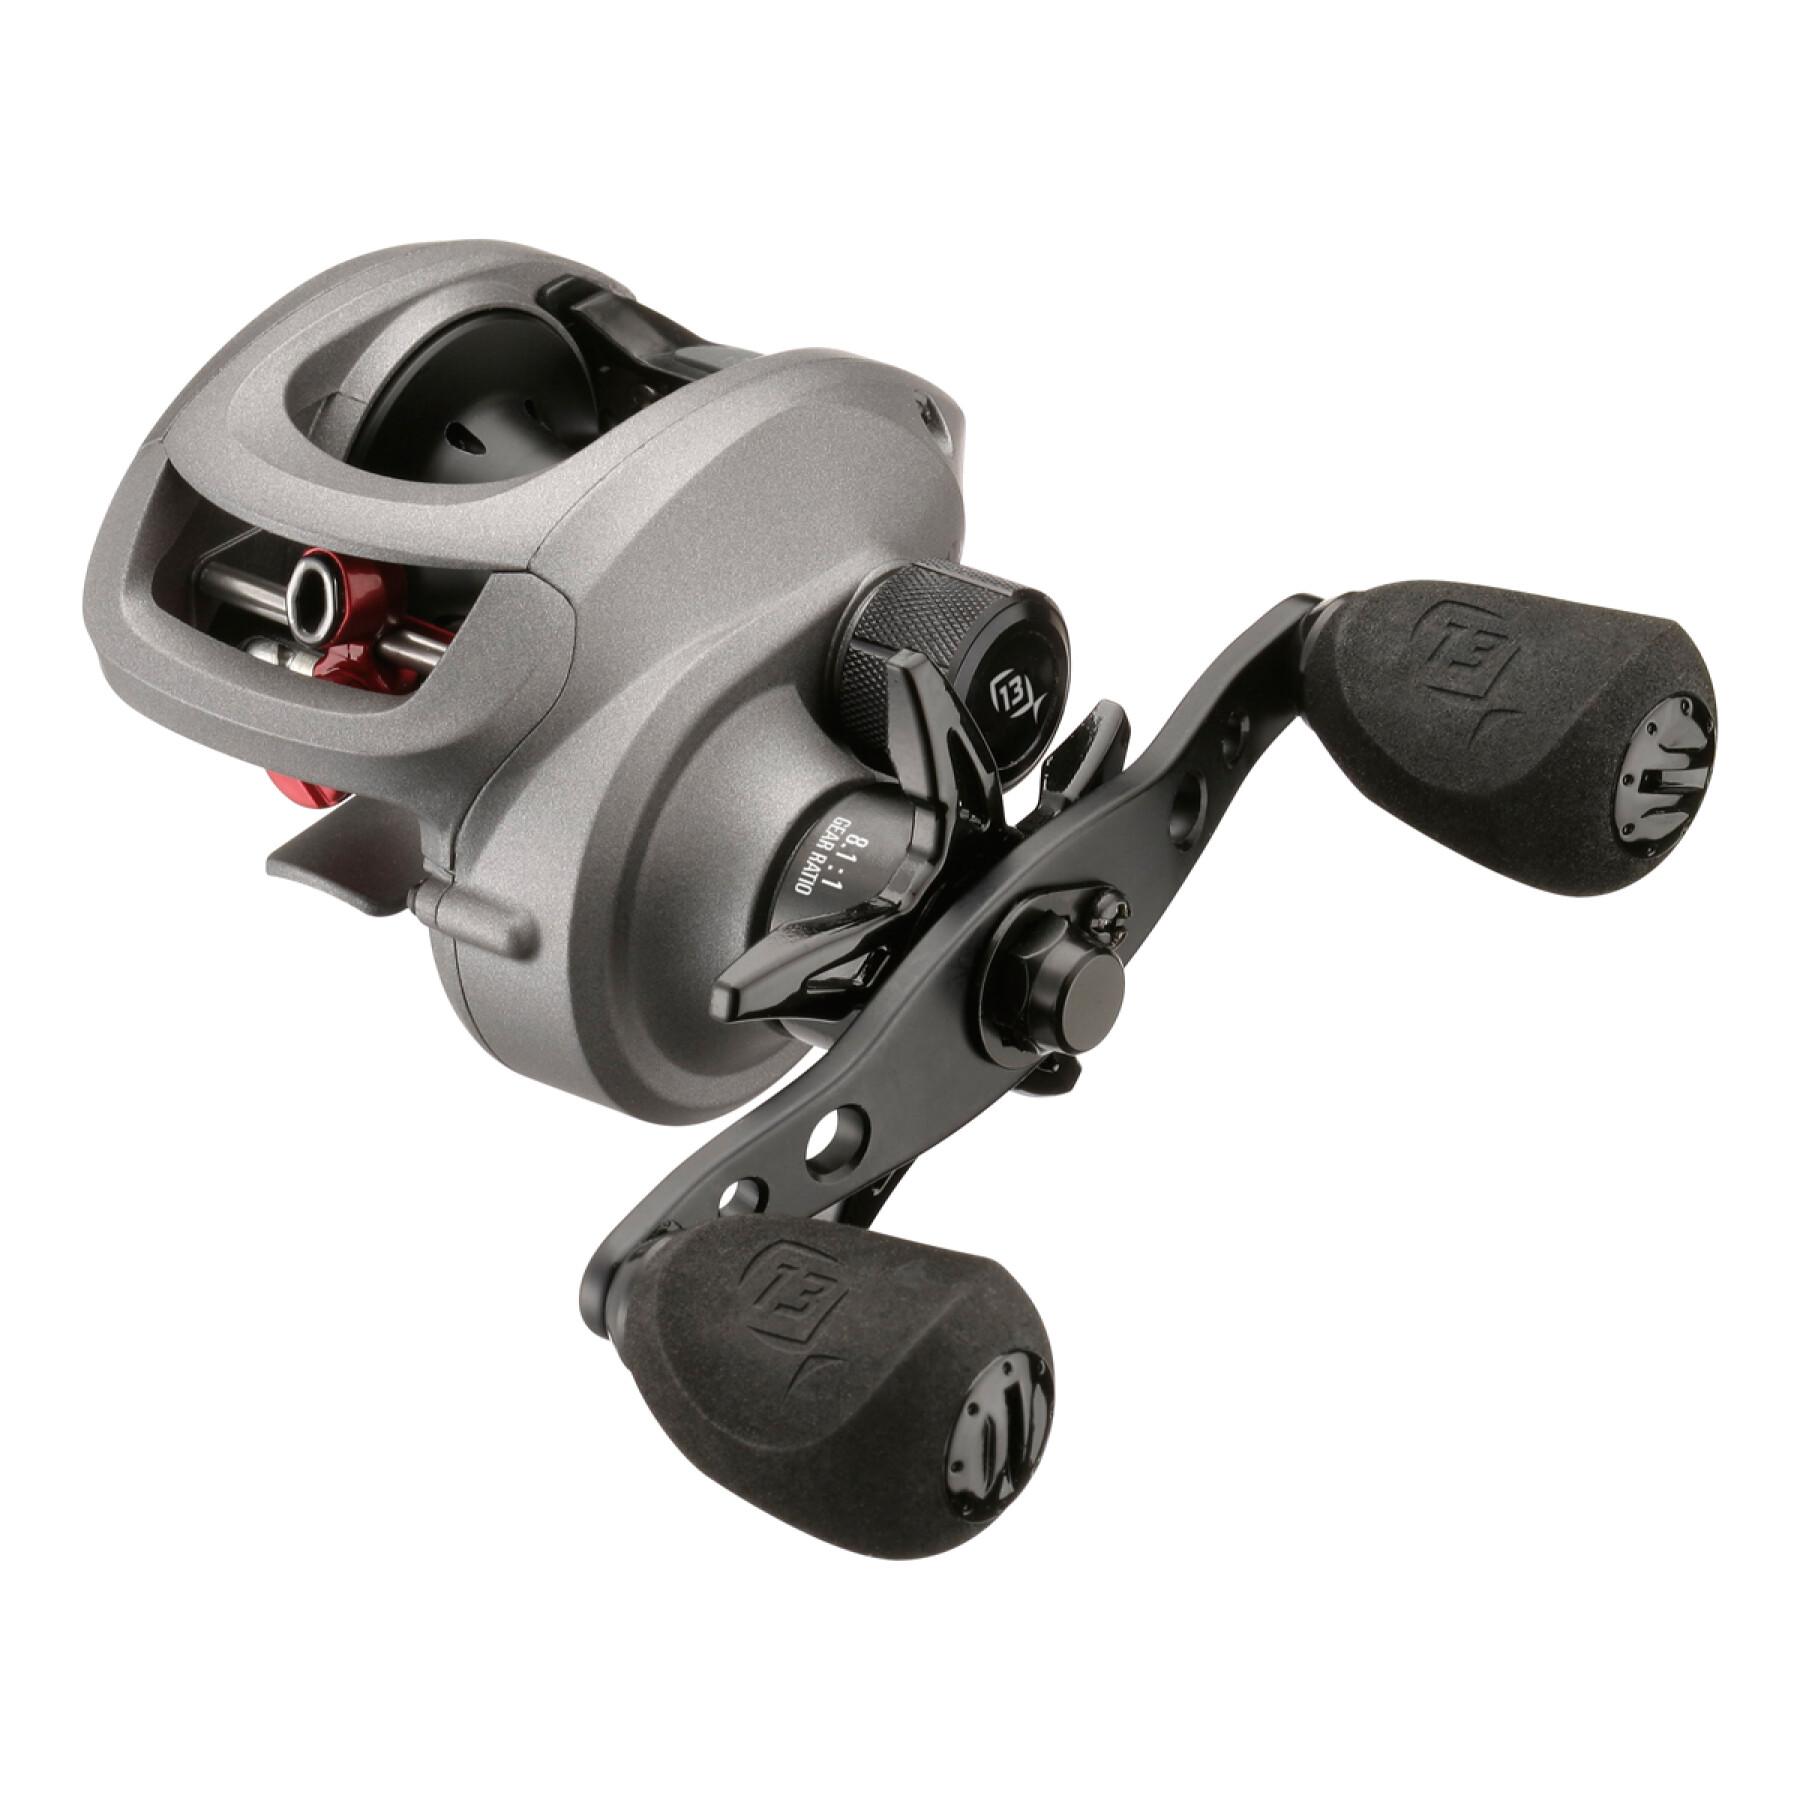 Rolle 13 Fishing Inception BC 8.1:1 lh